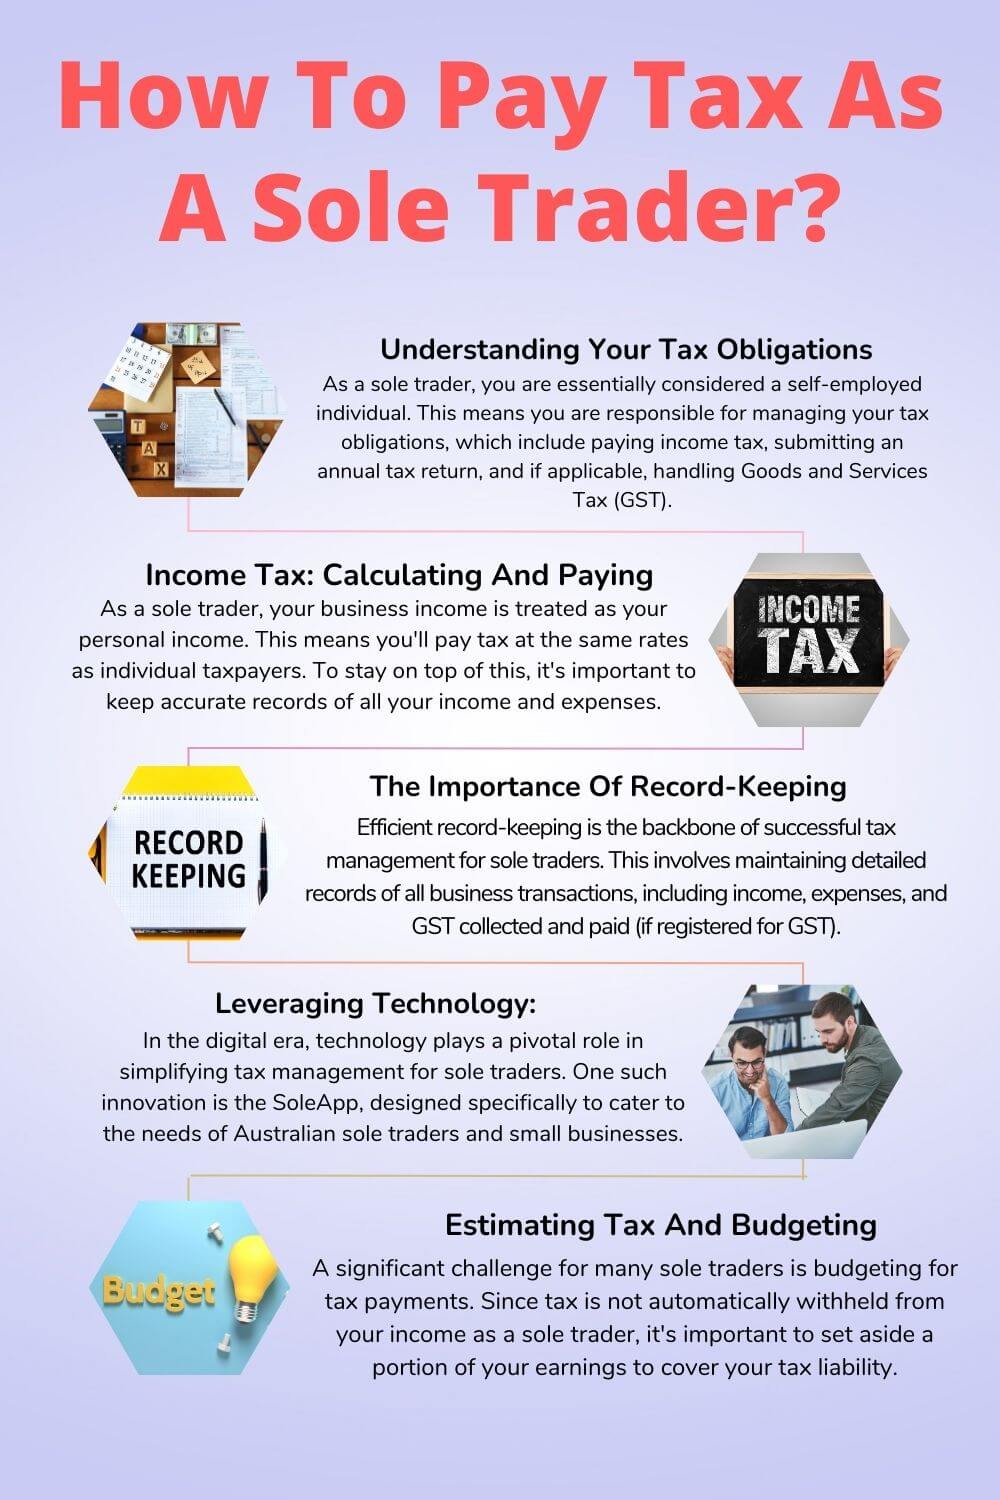 How To Pay Tax As A Sole Trader1